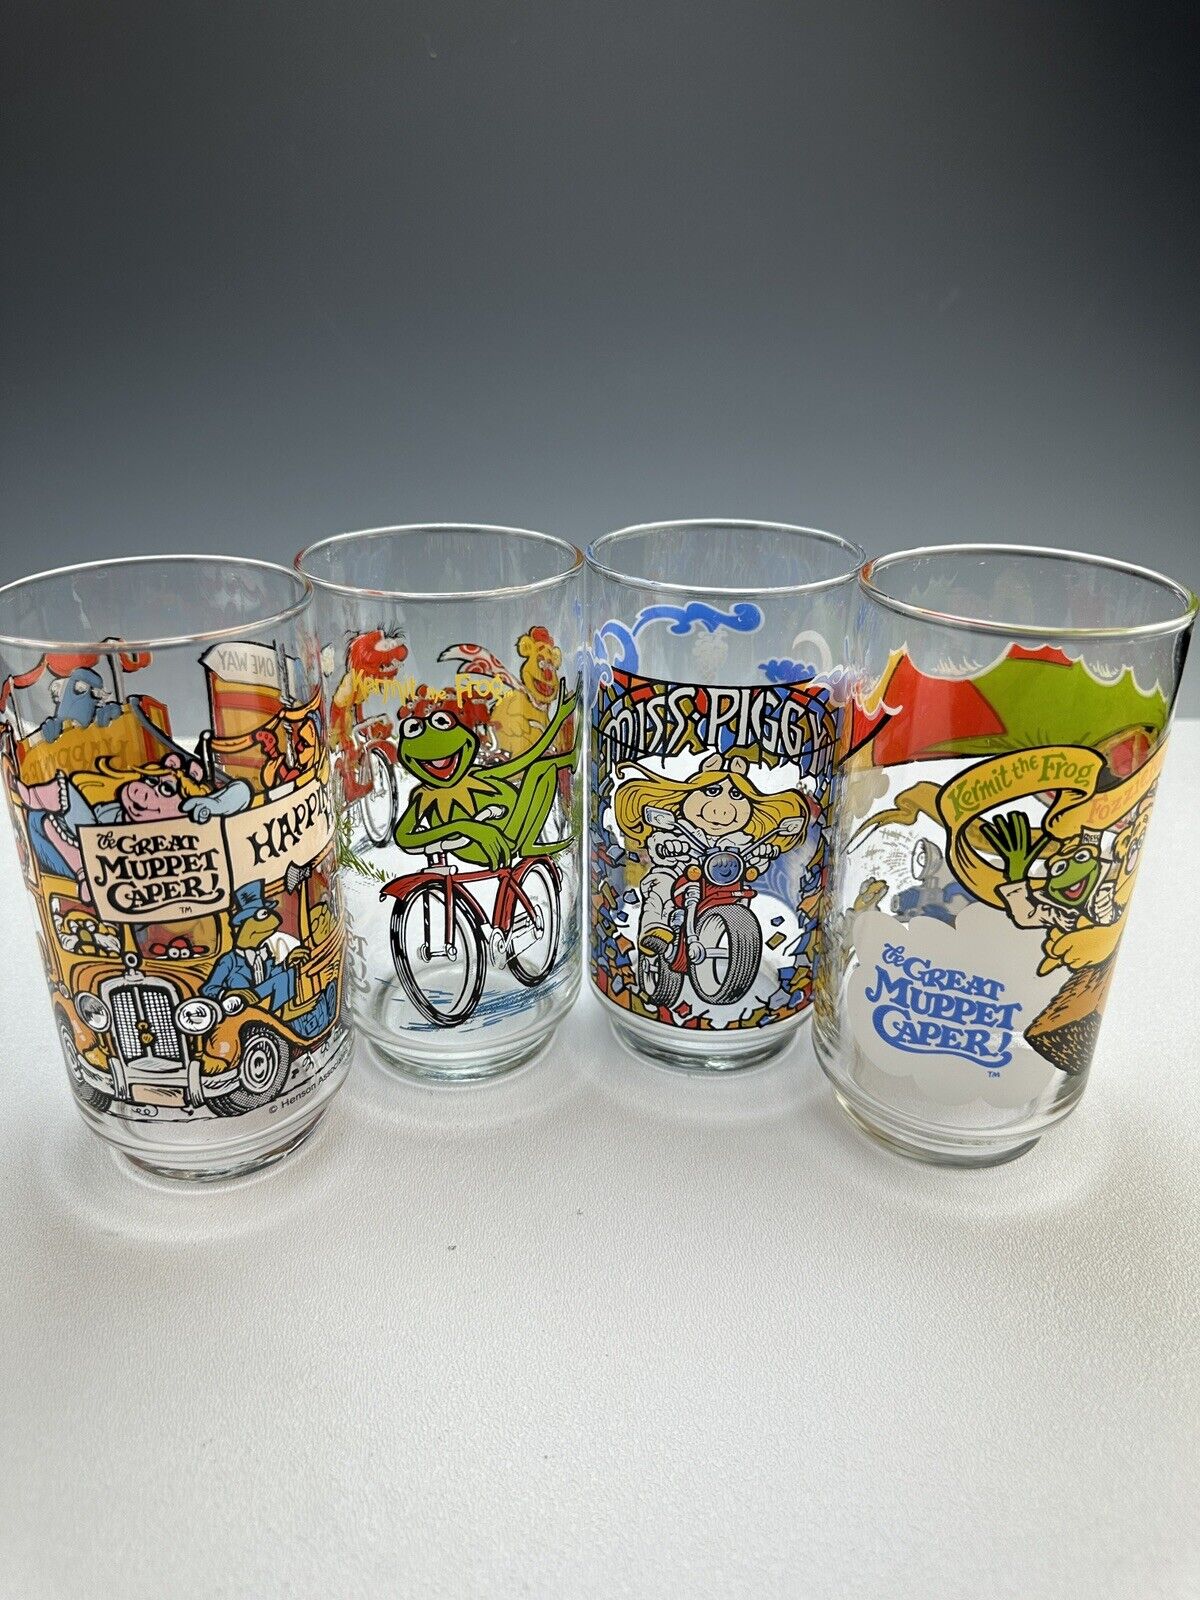 Vintage 1981 McDonalds The Great Muppet Caper Collector Glasses Full Set of 4